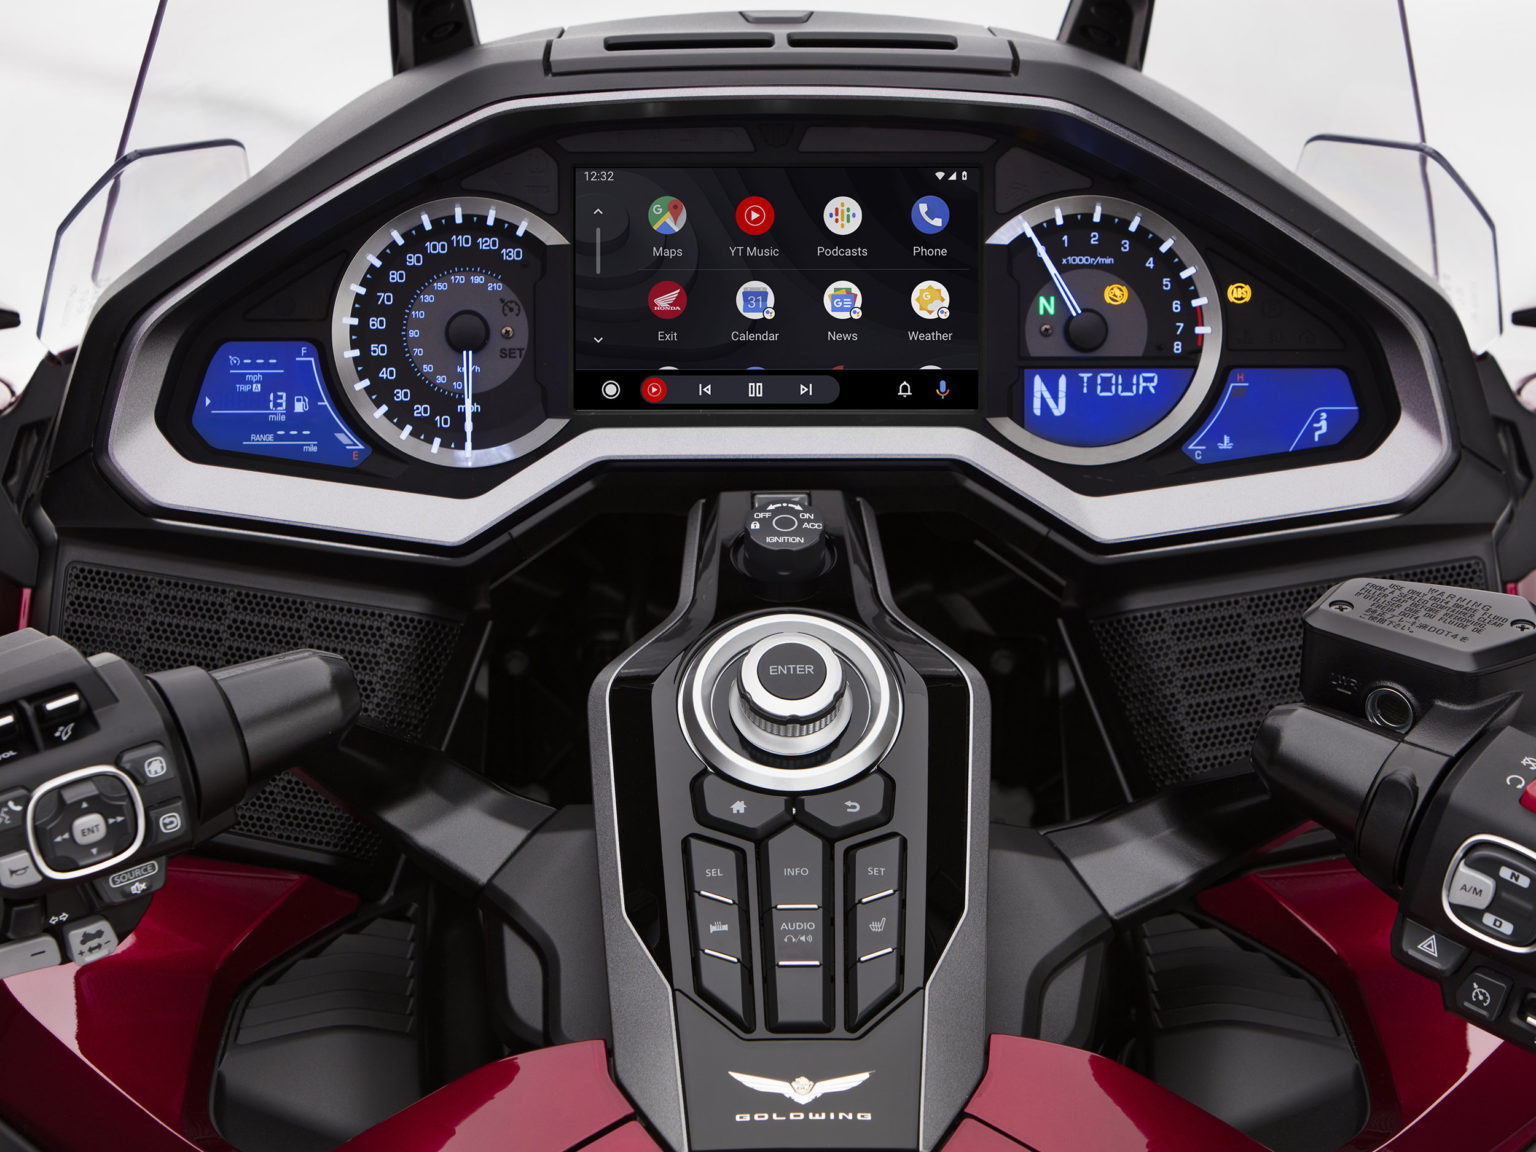 Android Auto and Apple CarPlay are now available for Gold Wing motorcycles.